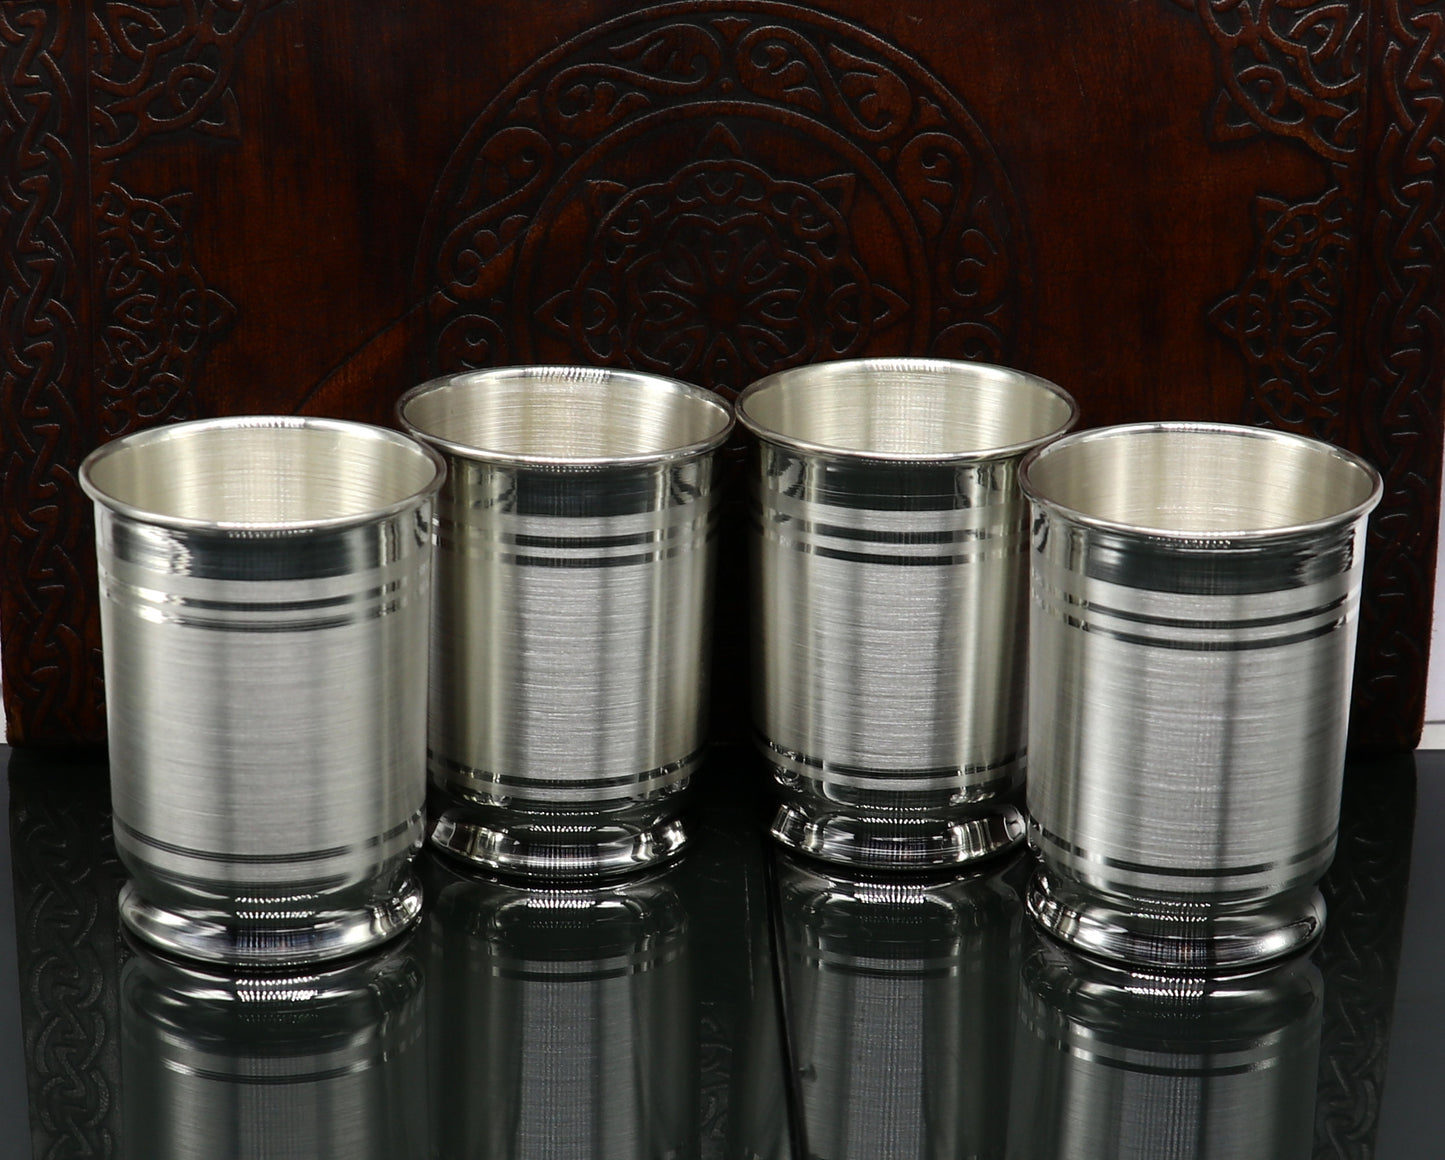 999 fine silver Water glass tumbler set , silver vessel, silver baby utensils, silver puja article, gifting utensils from india sv114 - TRIBAL ORNAMENTS